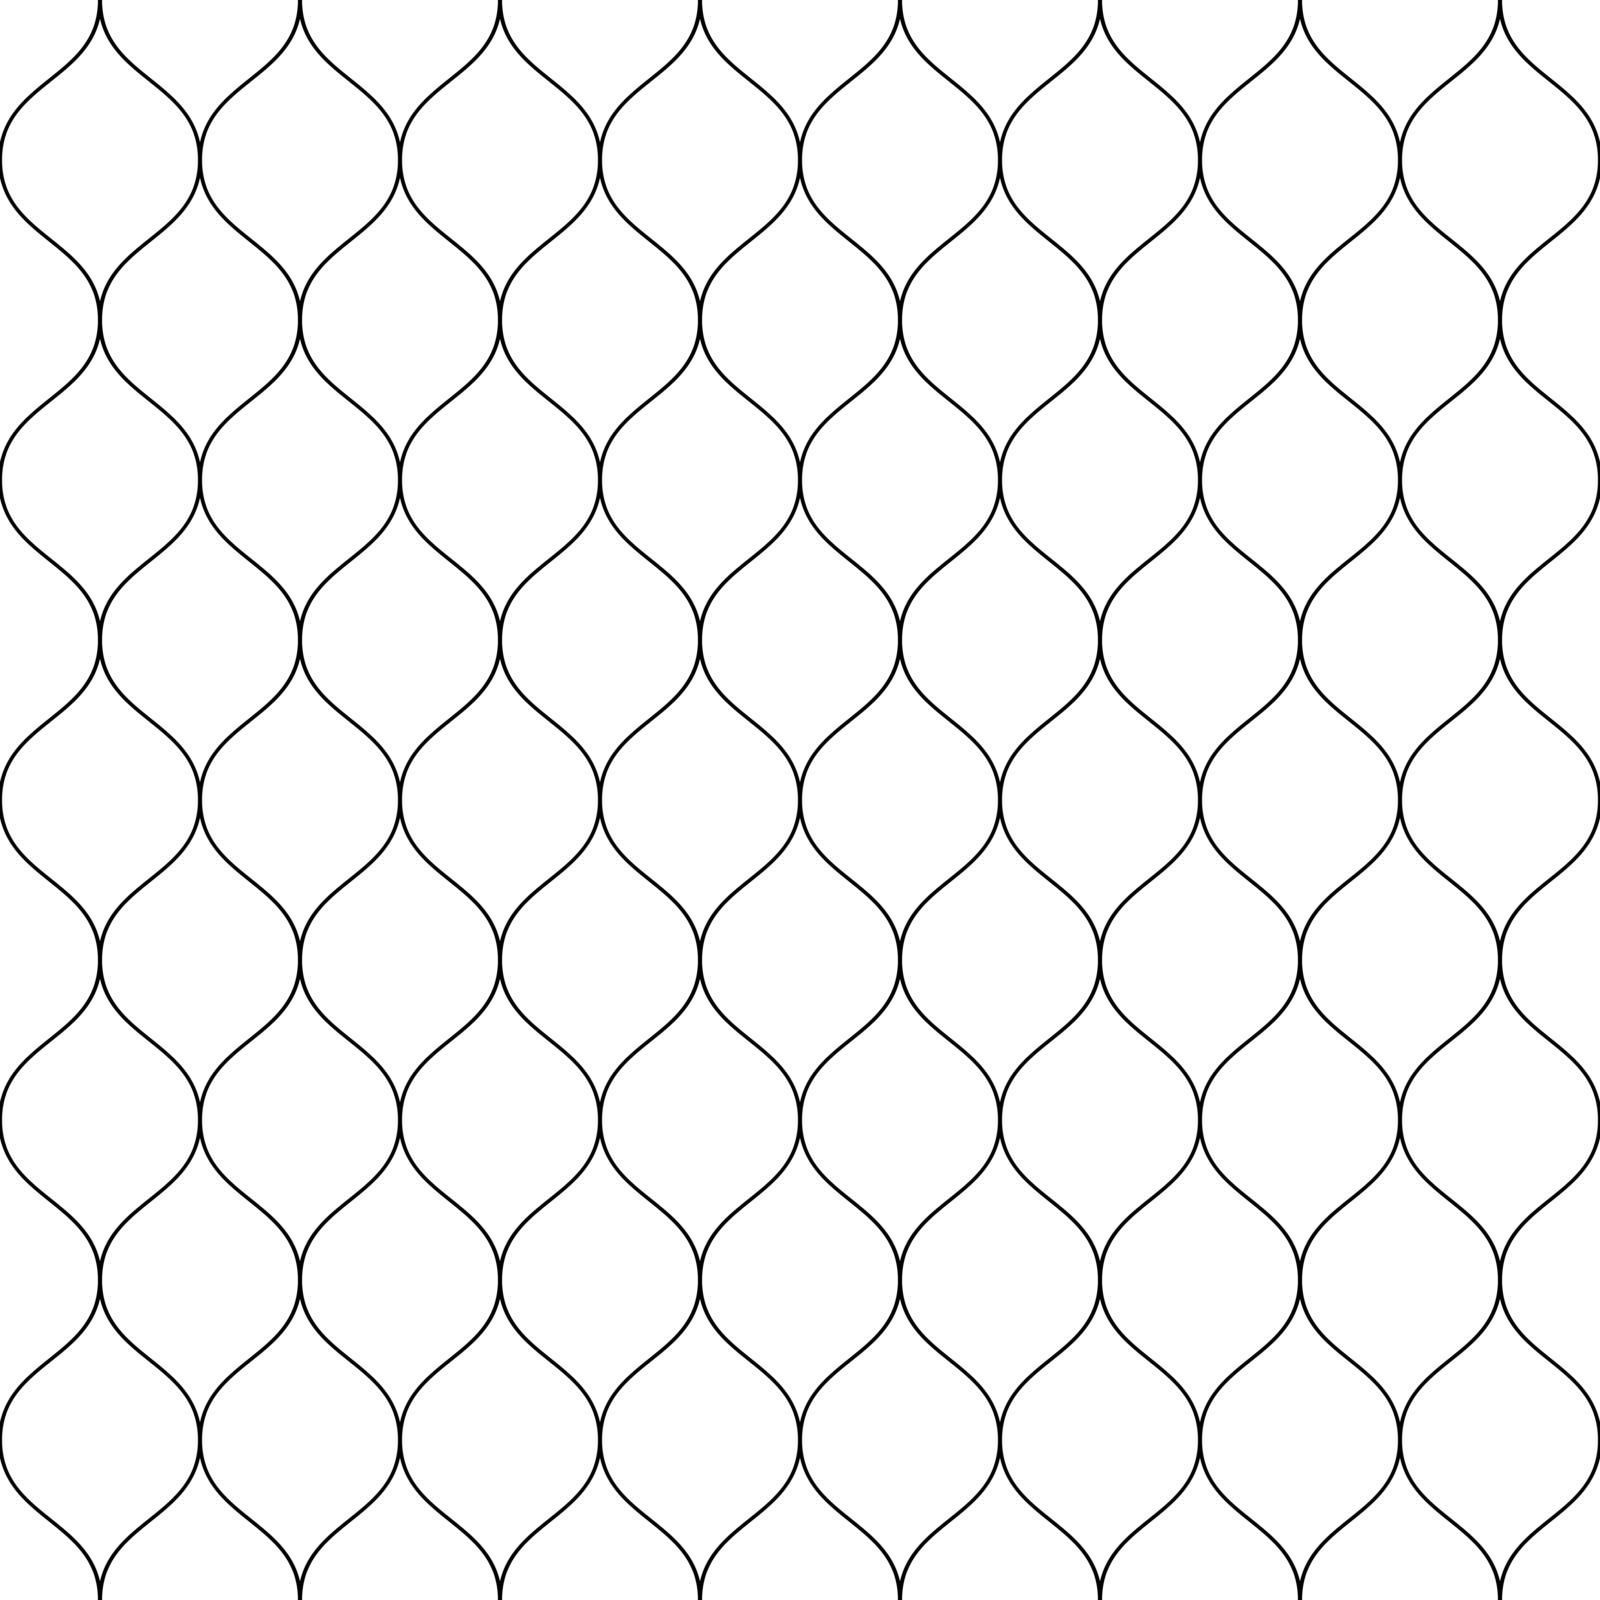 Seamless wired netting fence. Simple black vector illustration on white background.